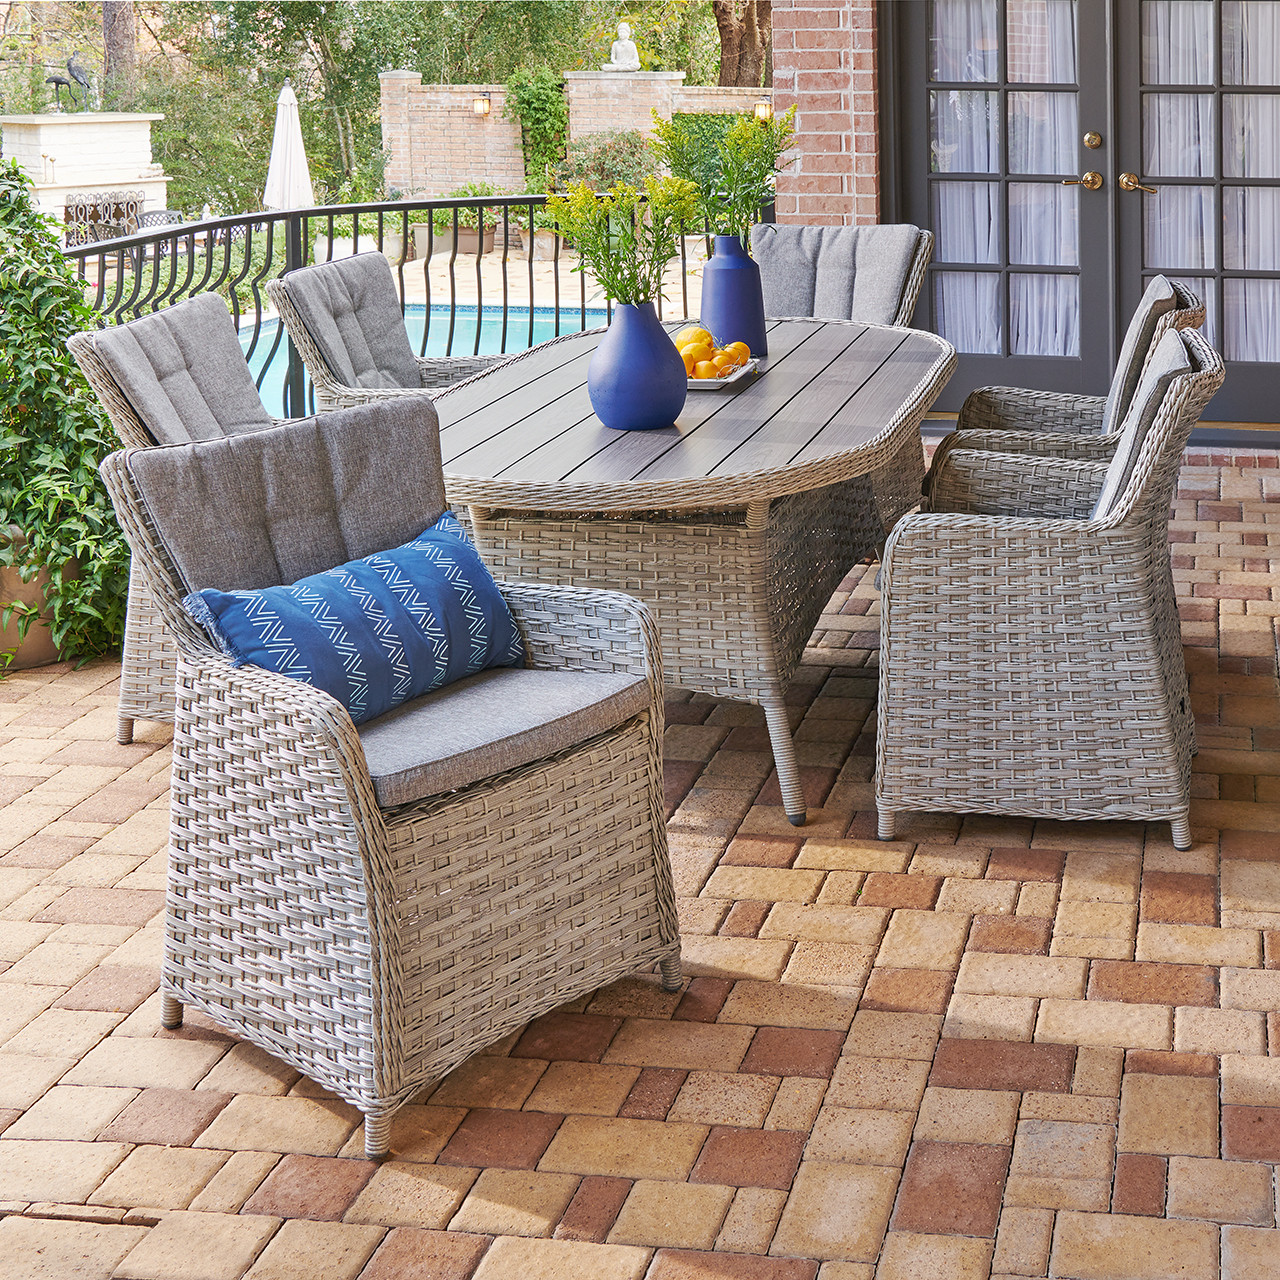 Samoa Slate Outdoor Wicker and Grey Linen Cushion 7 Pc. High Back Dining Set with 80 x 42 in. Table